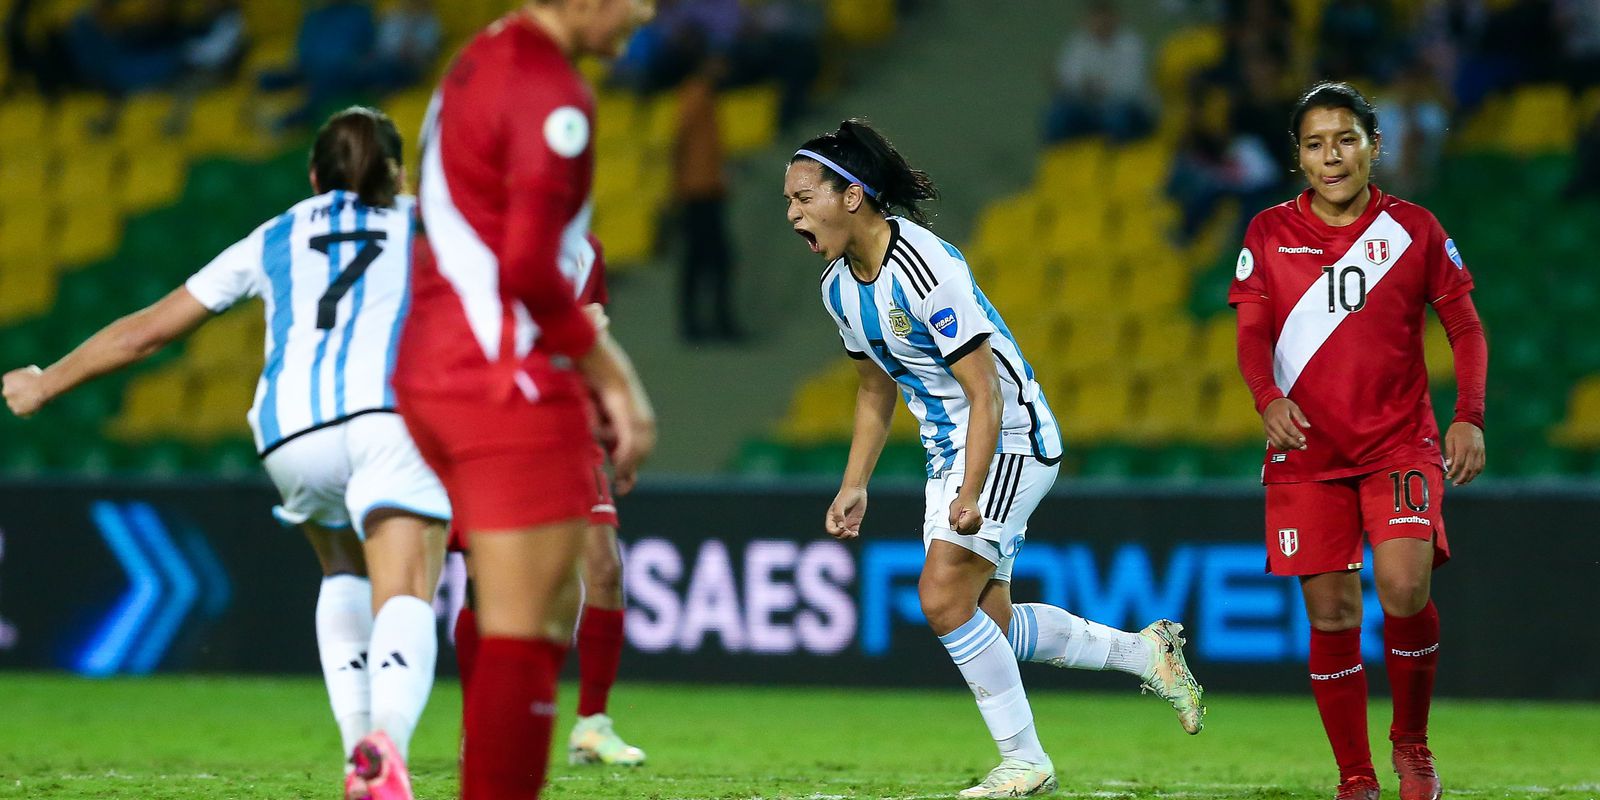 Argentina wins with a rout in the Women's Copa America